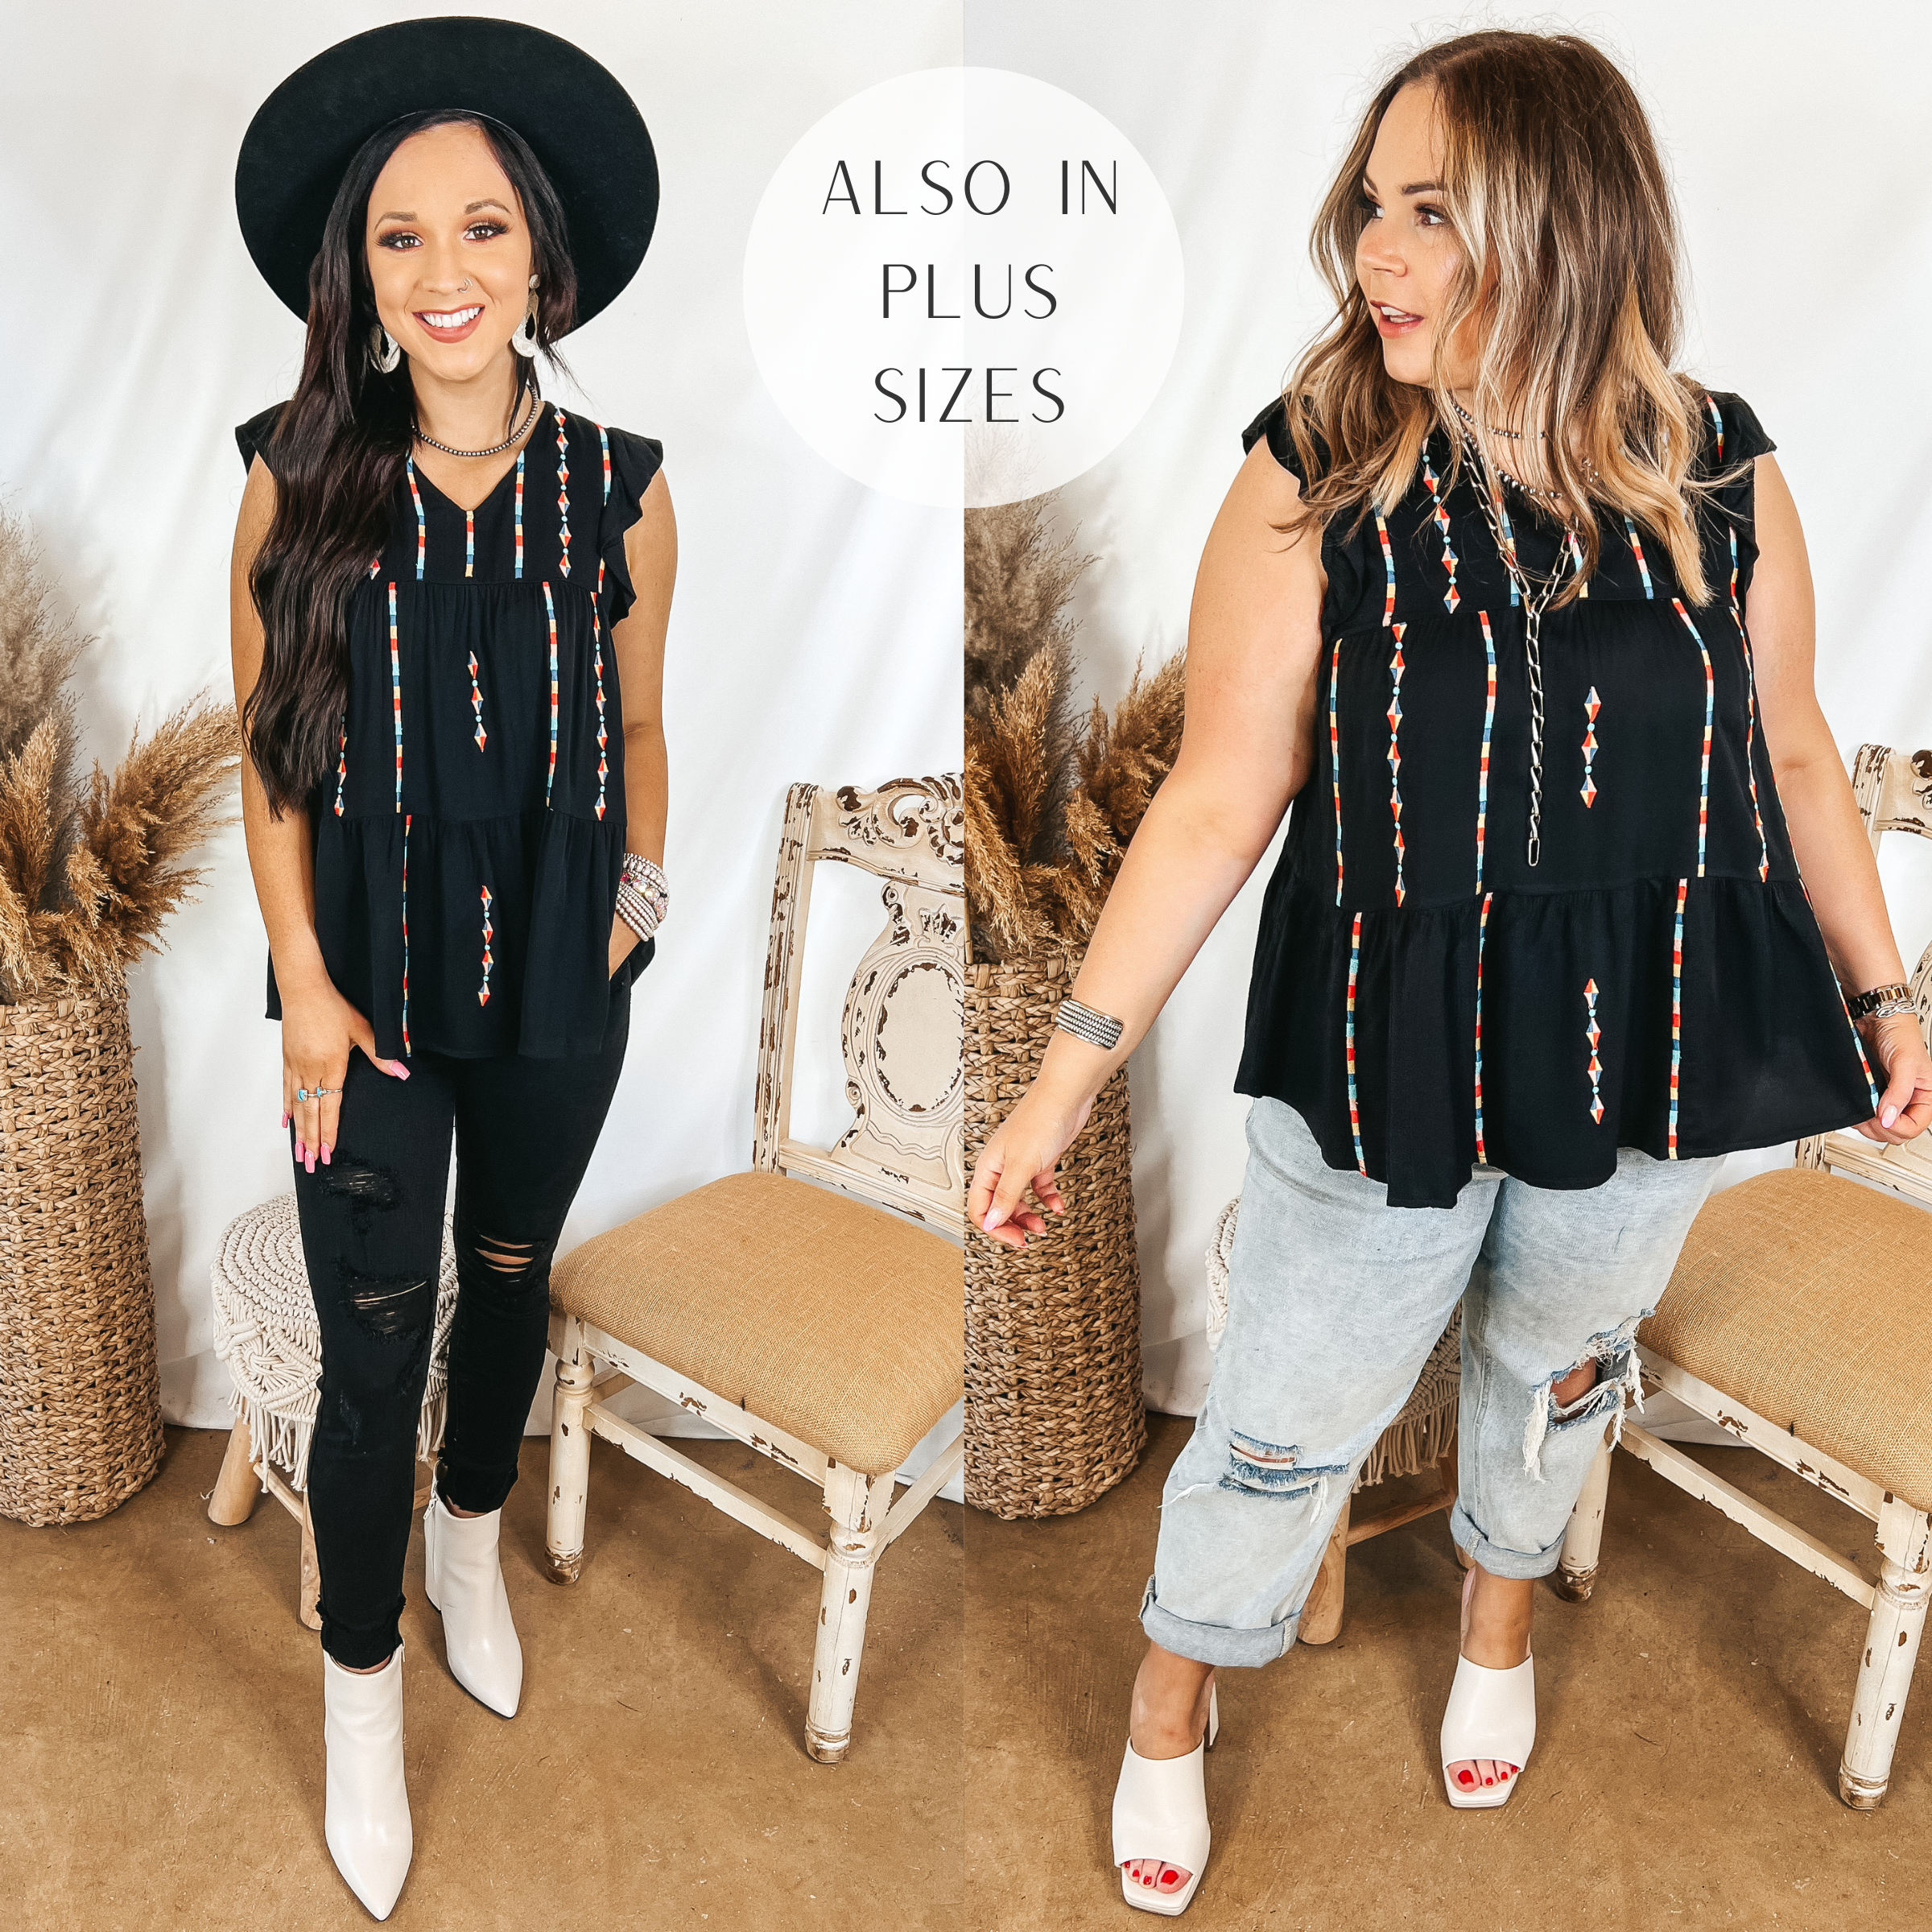 Models are wearing a tiered top with embroidery on the front. Size small model has it paired with black jeans, white booties, and a black hat. Size large model has it paired with light wash boyfriend jeans, white heels, and silver jewelry.